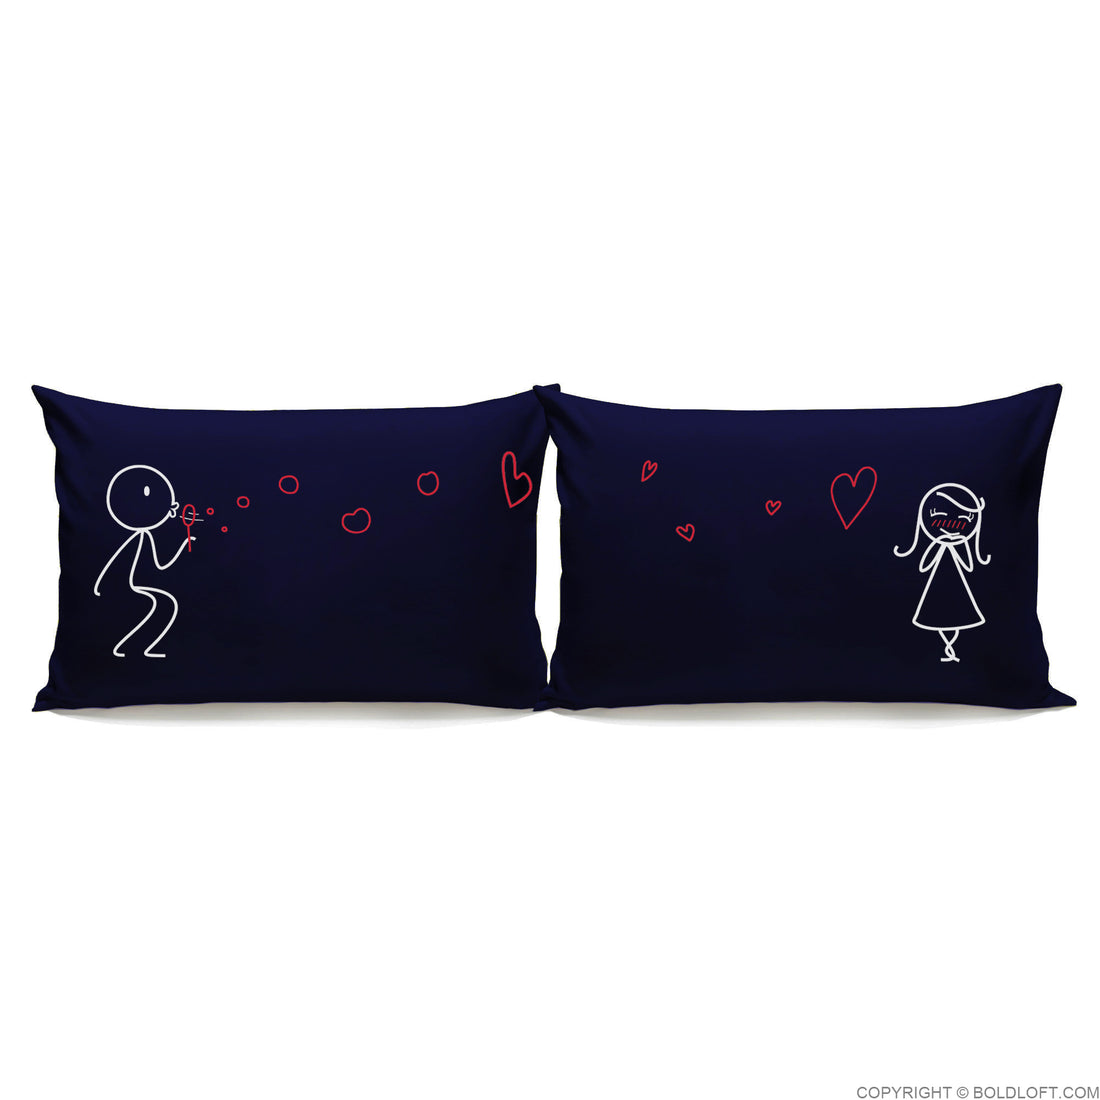 From My Heart to Yours™ Pillowcases (Dark Blue)